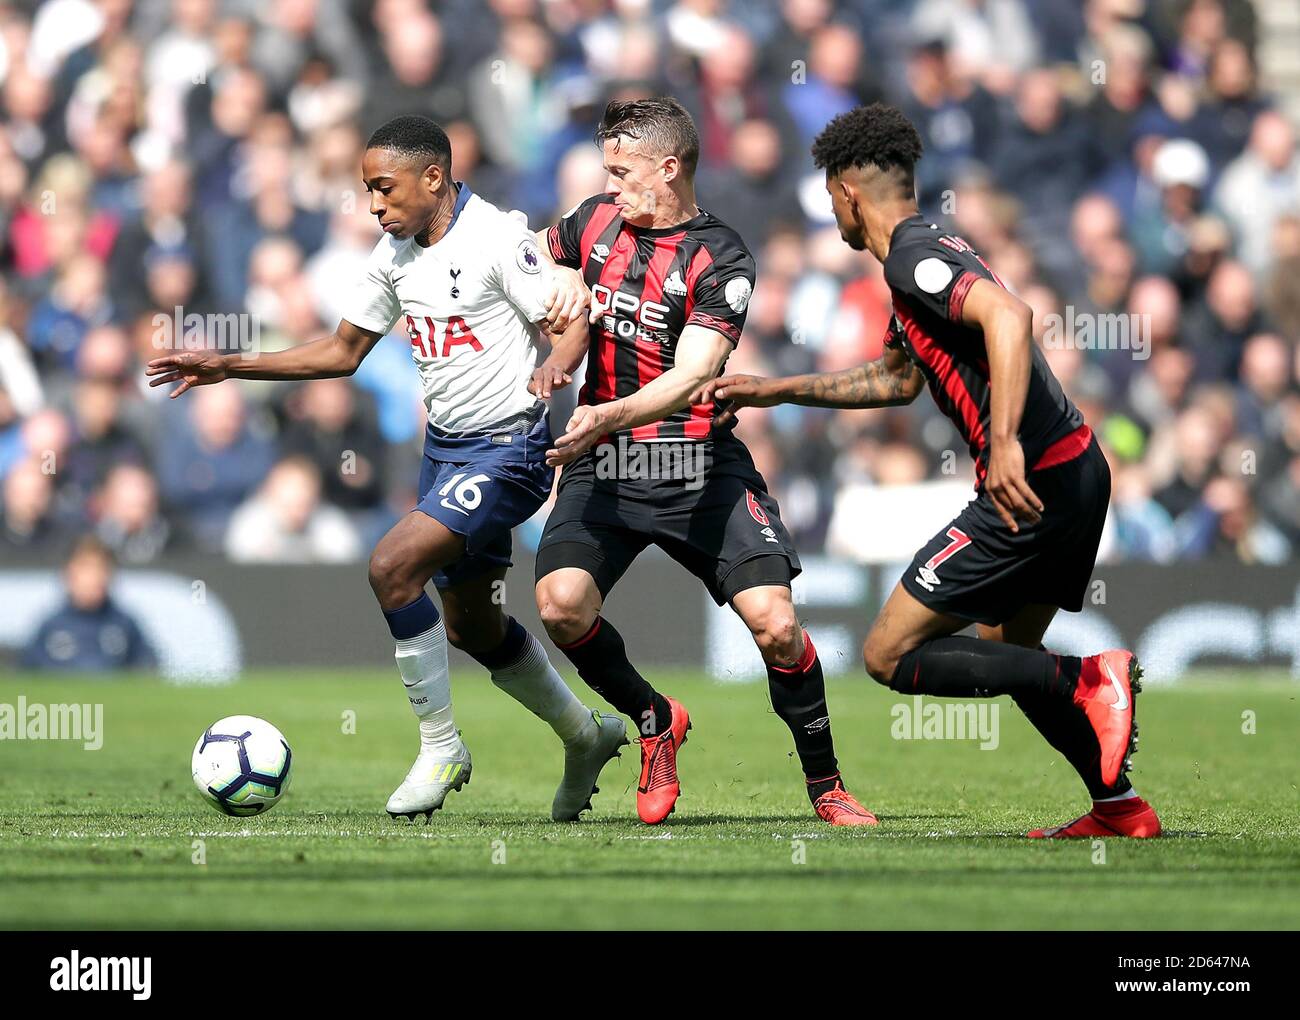 Tottenham Hotspur's Kyle Walker-Peters (left) battles for the ball with Bournemouth's Andrew Surman and Marc Pugh (right) Stock Photo